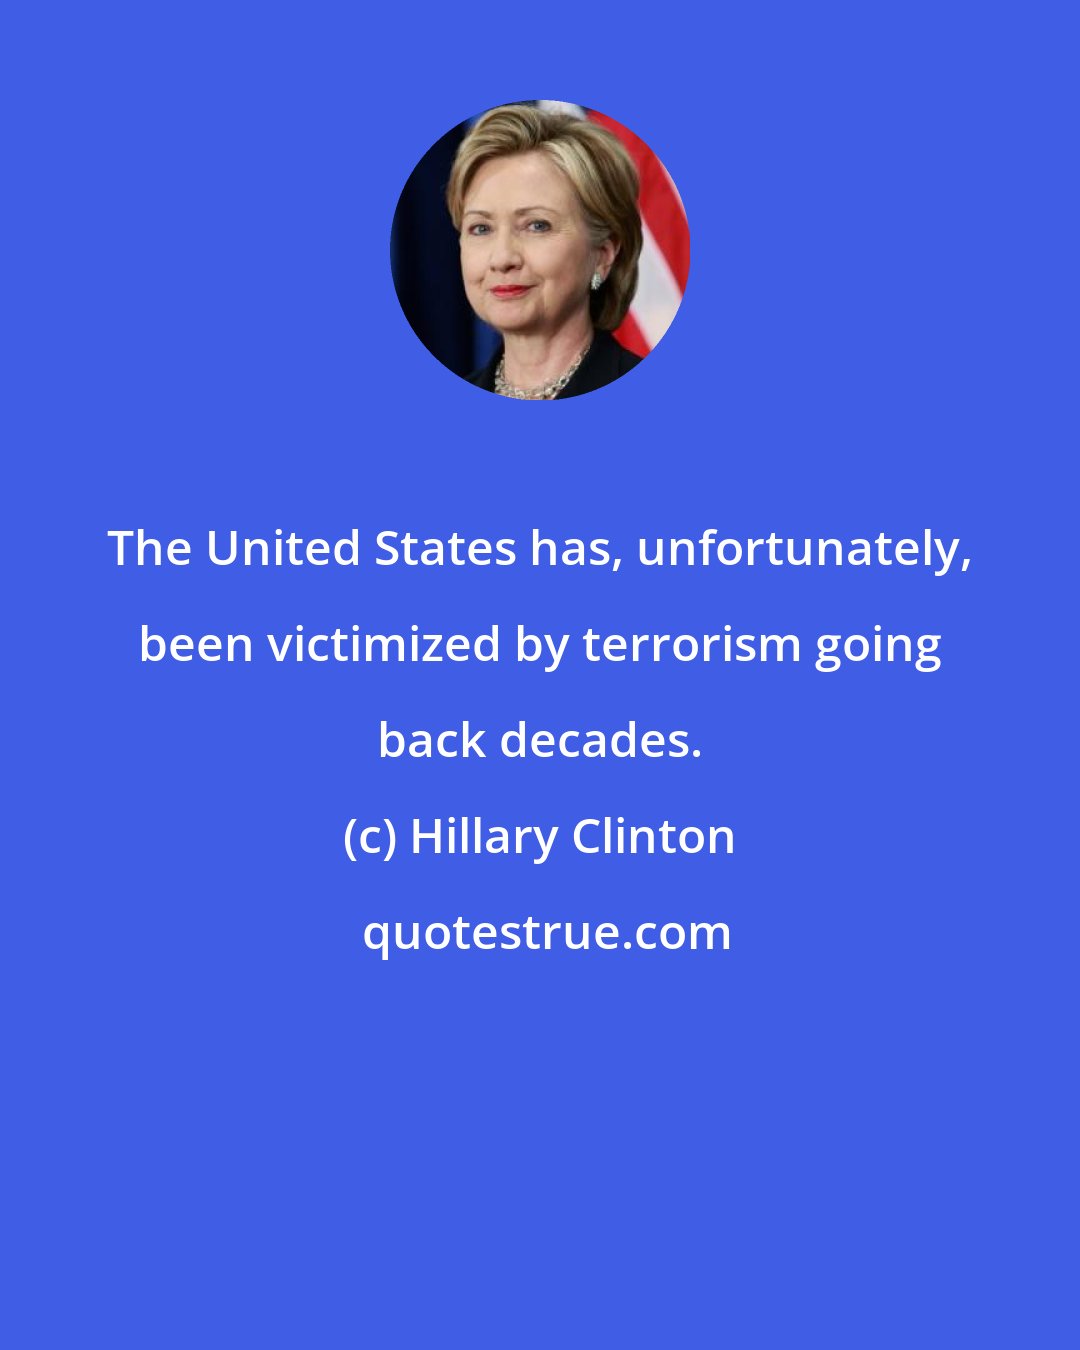 Hillary Clinton: The United States has, unfortunately, been victimized by terrorism going back decades.